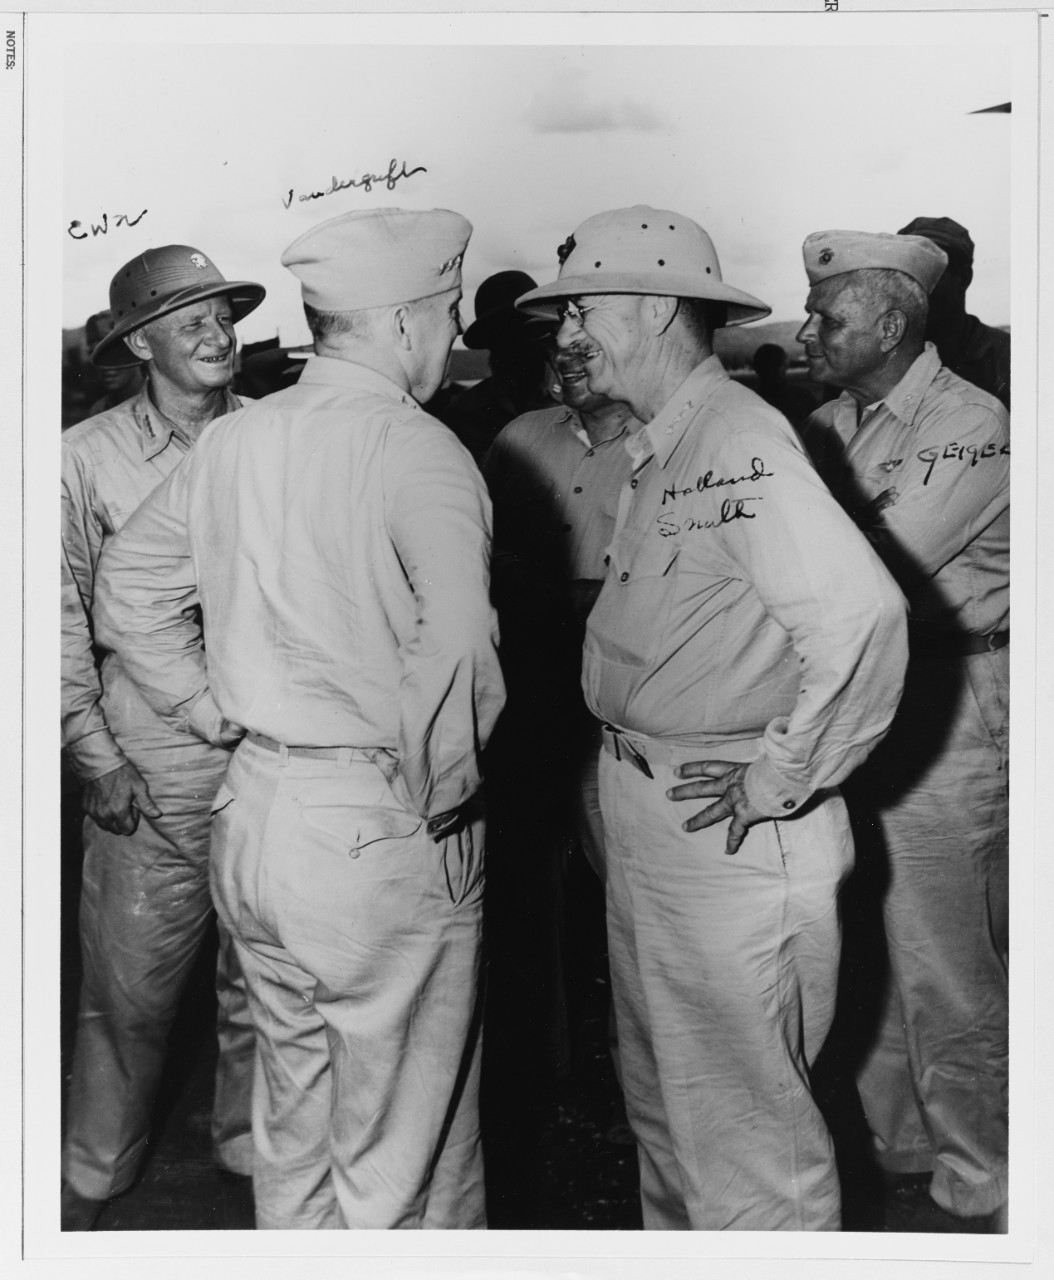 Photo #: NH 62783  Conference on Guam, 10 August 1944